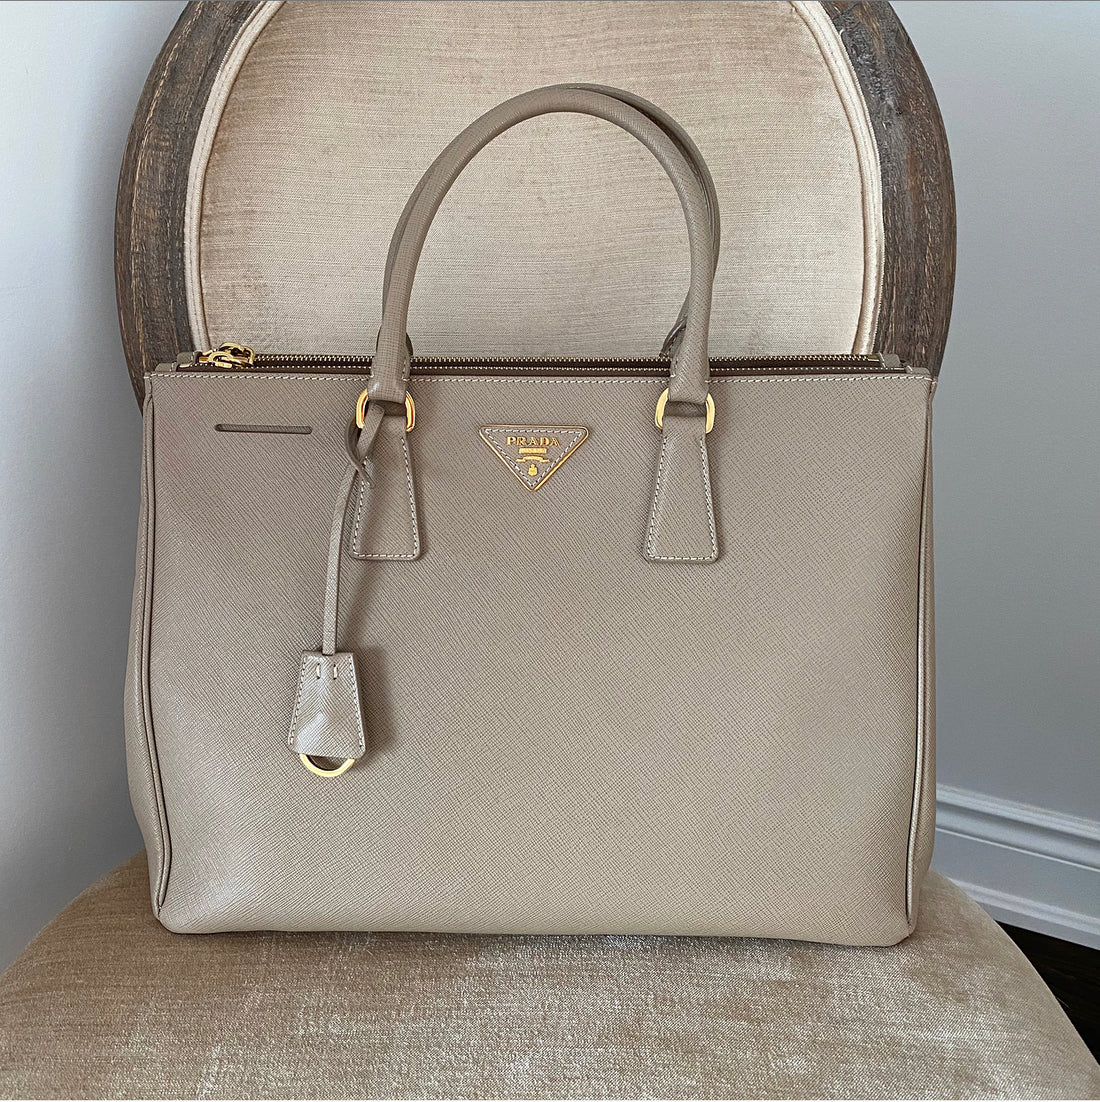 Prada Grey Saffiano Leather Double Zip Large Tote Bag BN1786